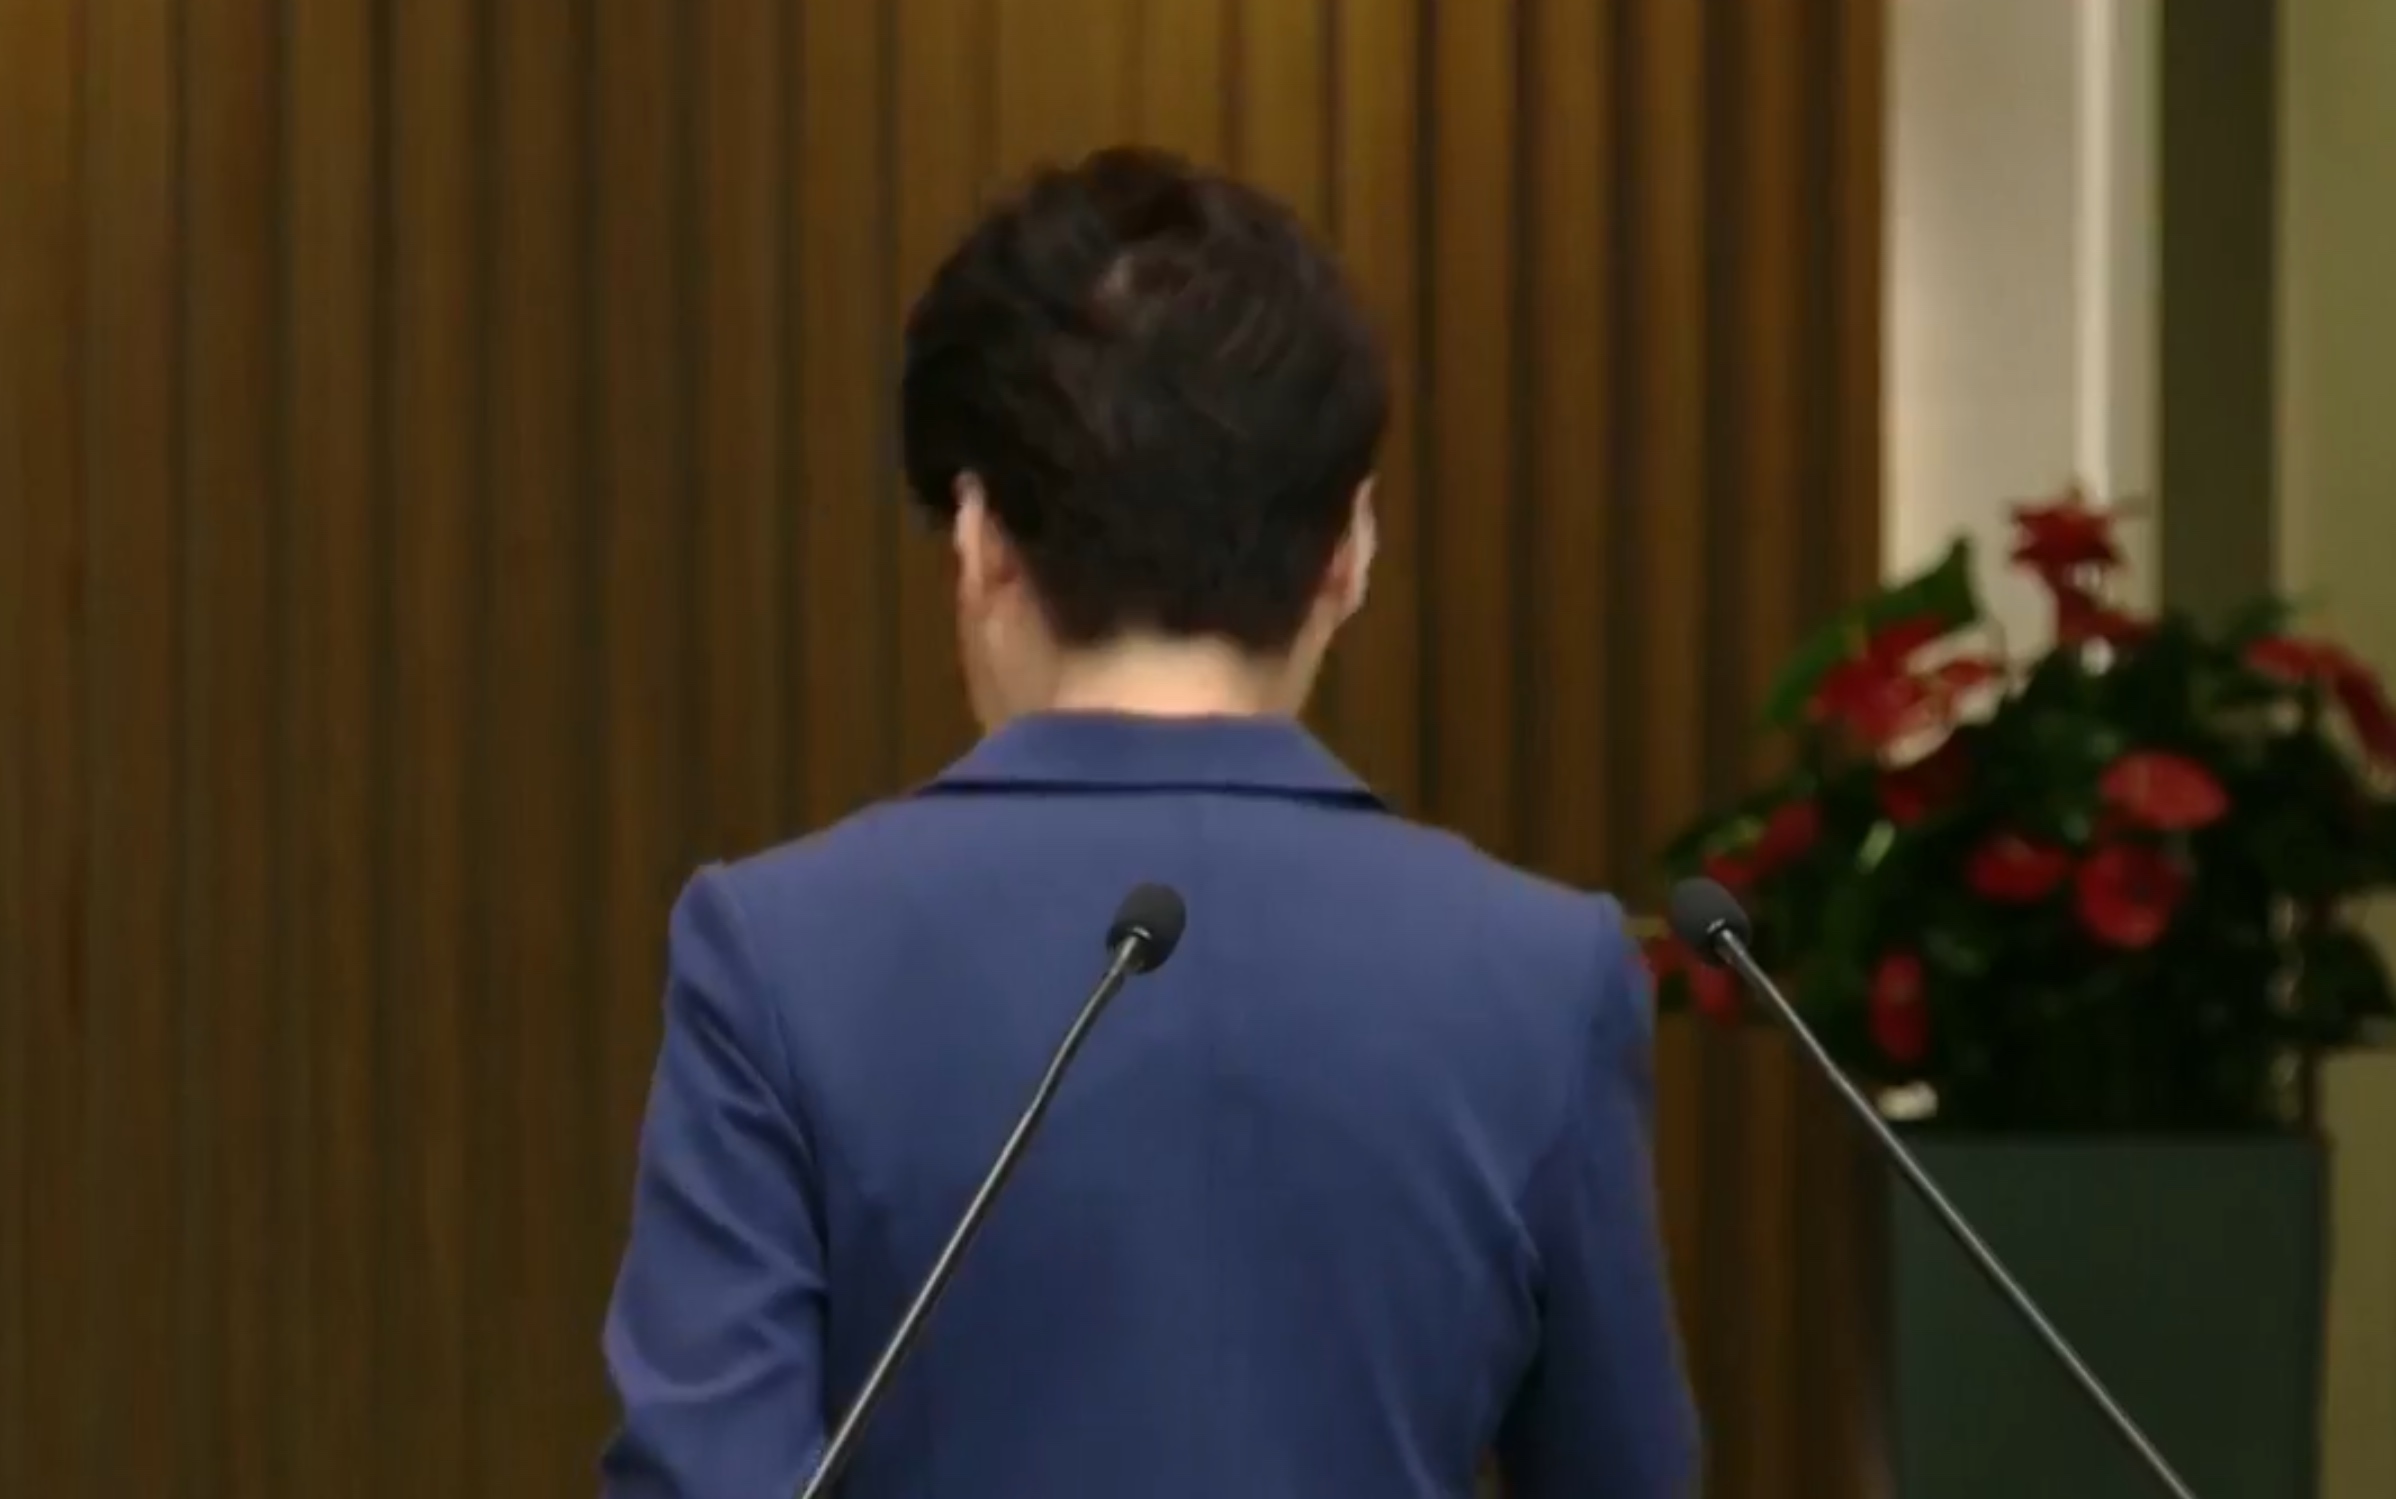 Hong Kong Chief Executive Carrie Lam leaves a heated press conference in August. Screengrab via RTHK livestream.